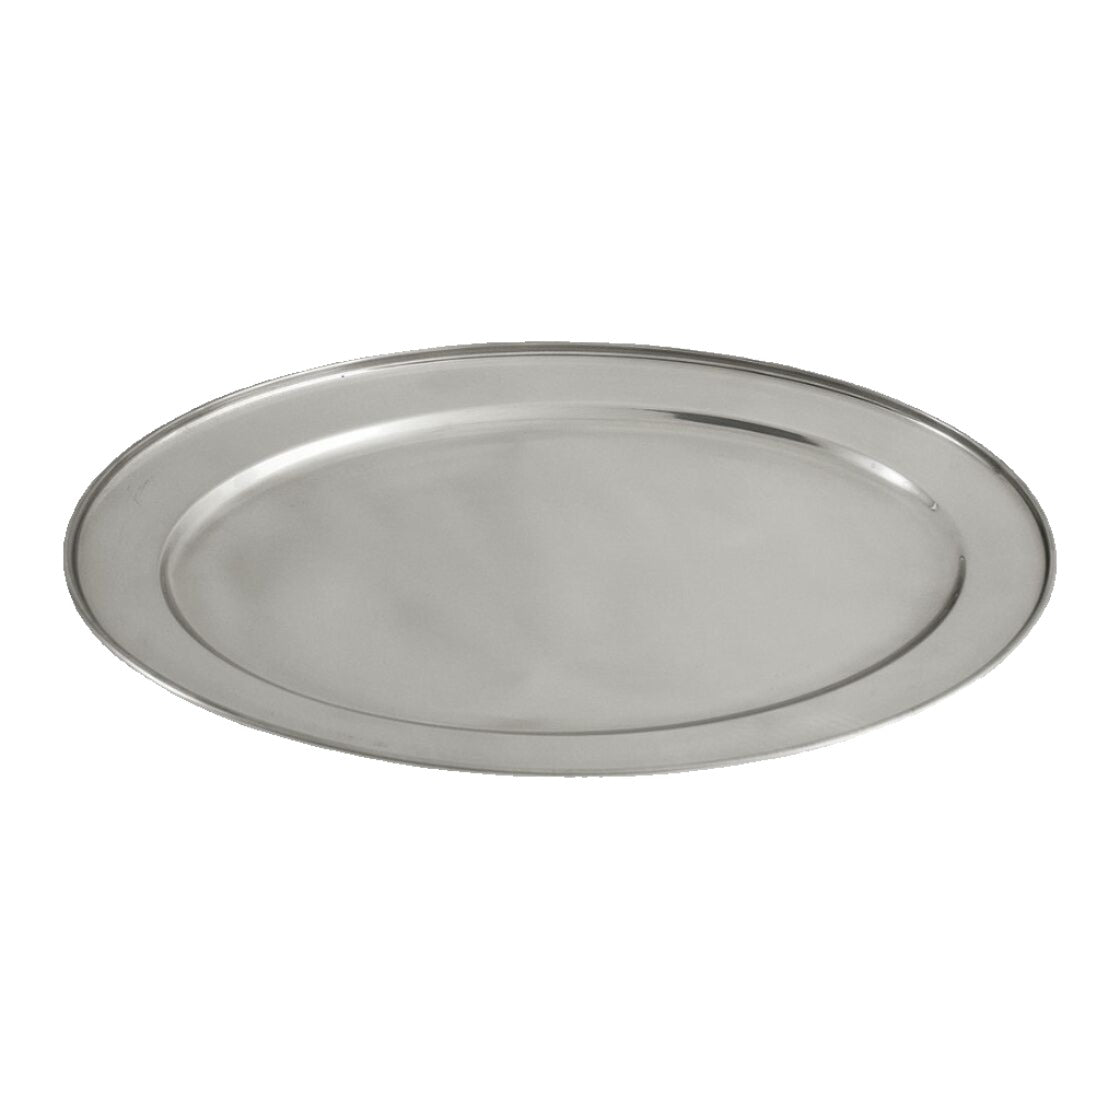 OVAL PLATE 35 CM STAINLESS STEEL